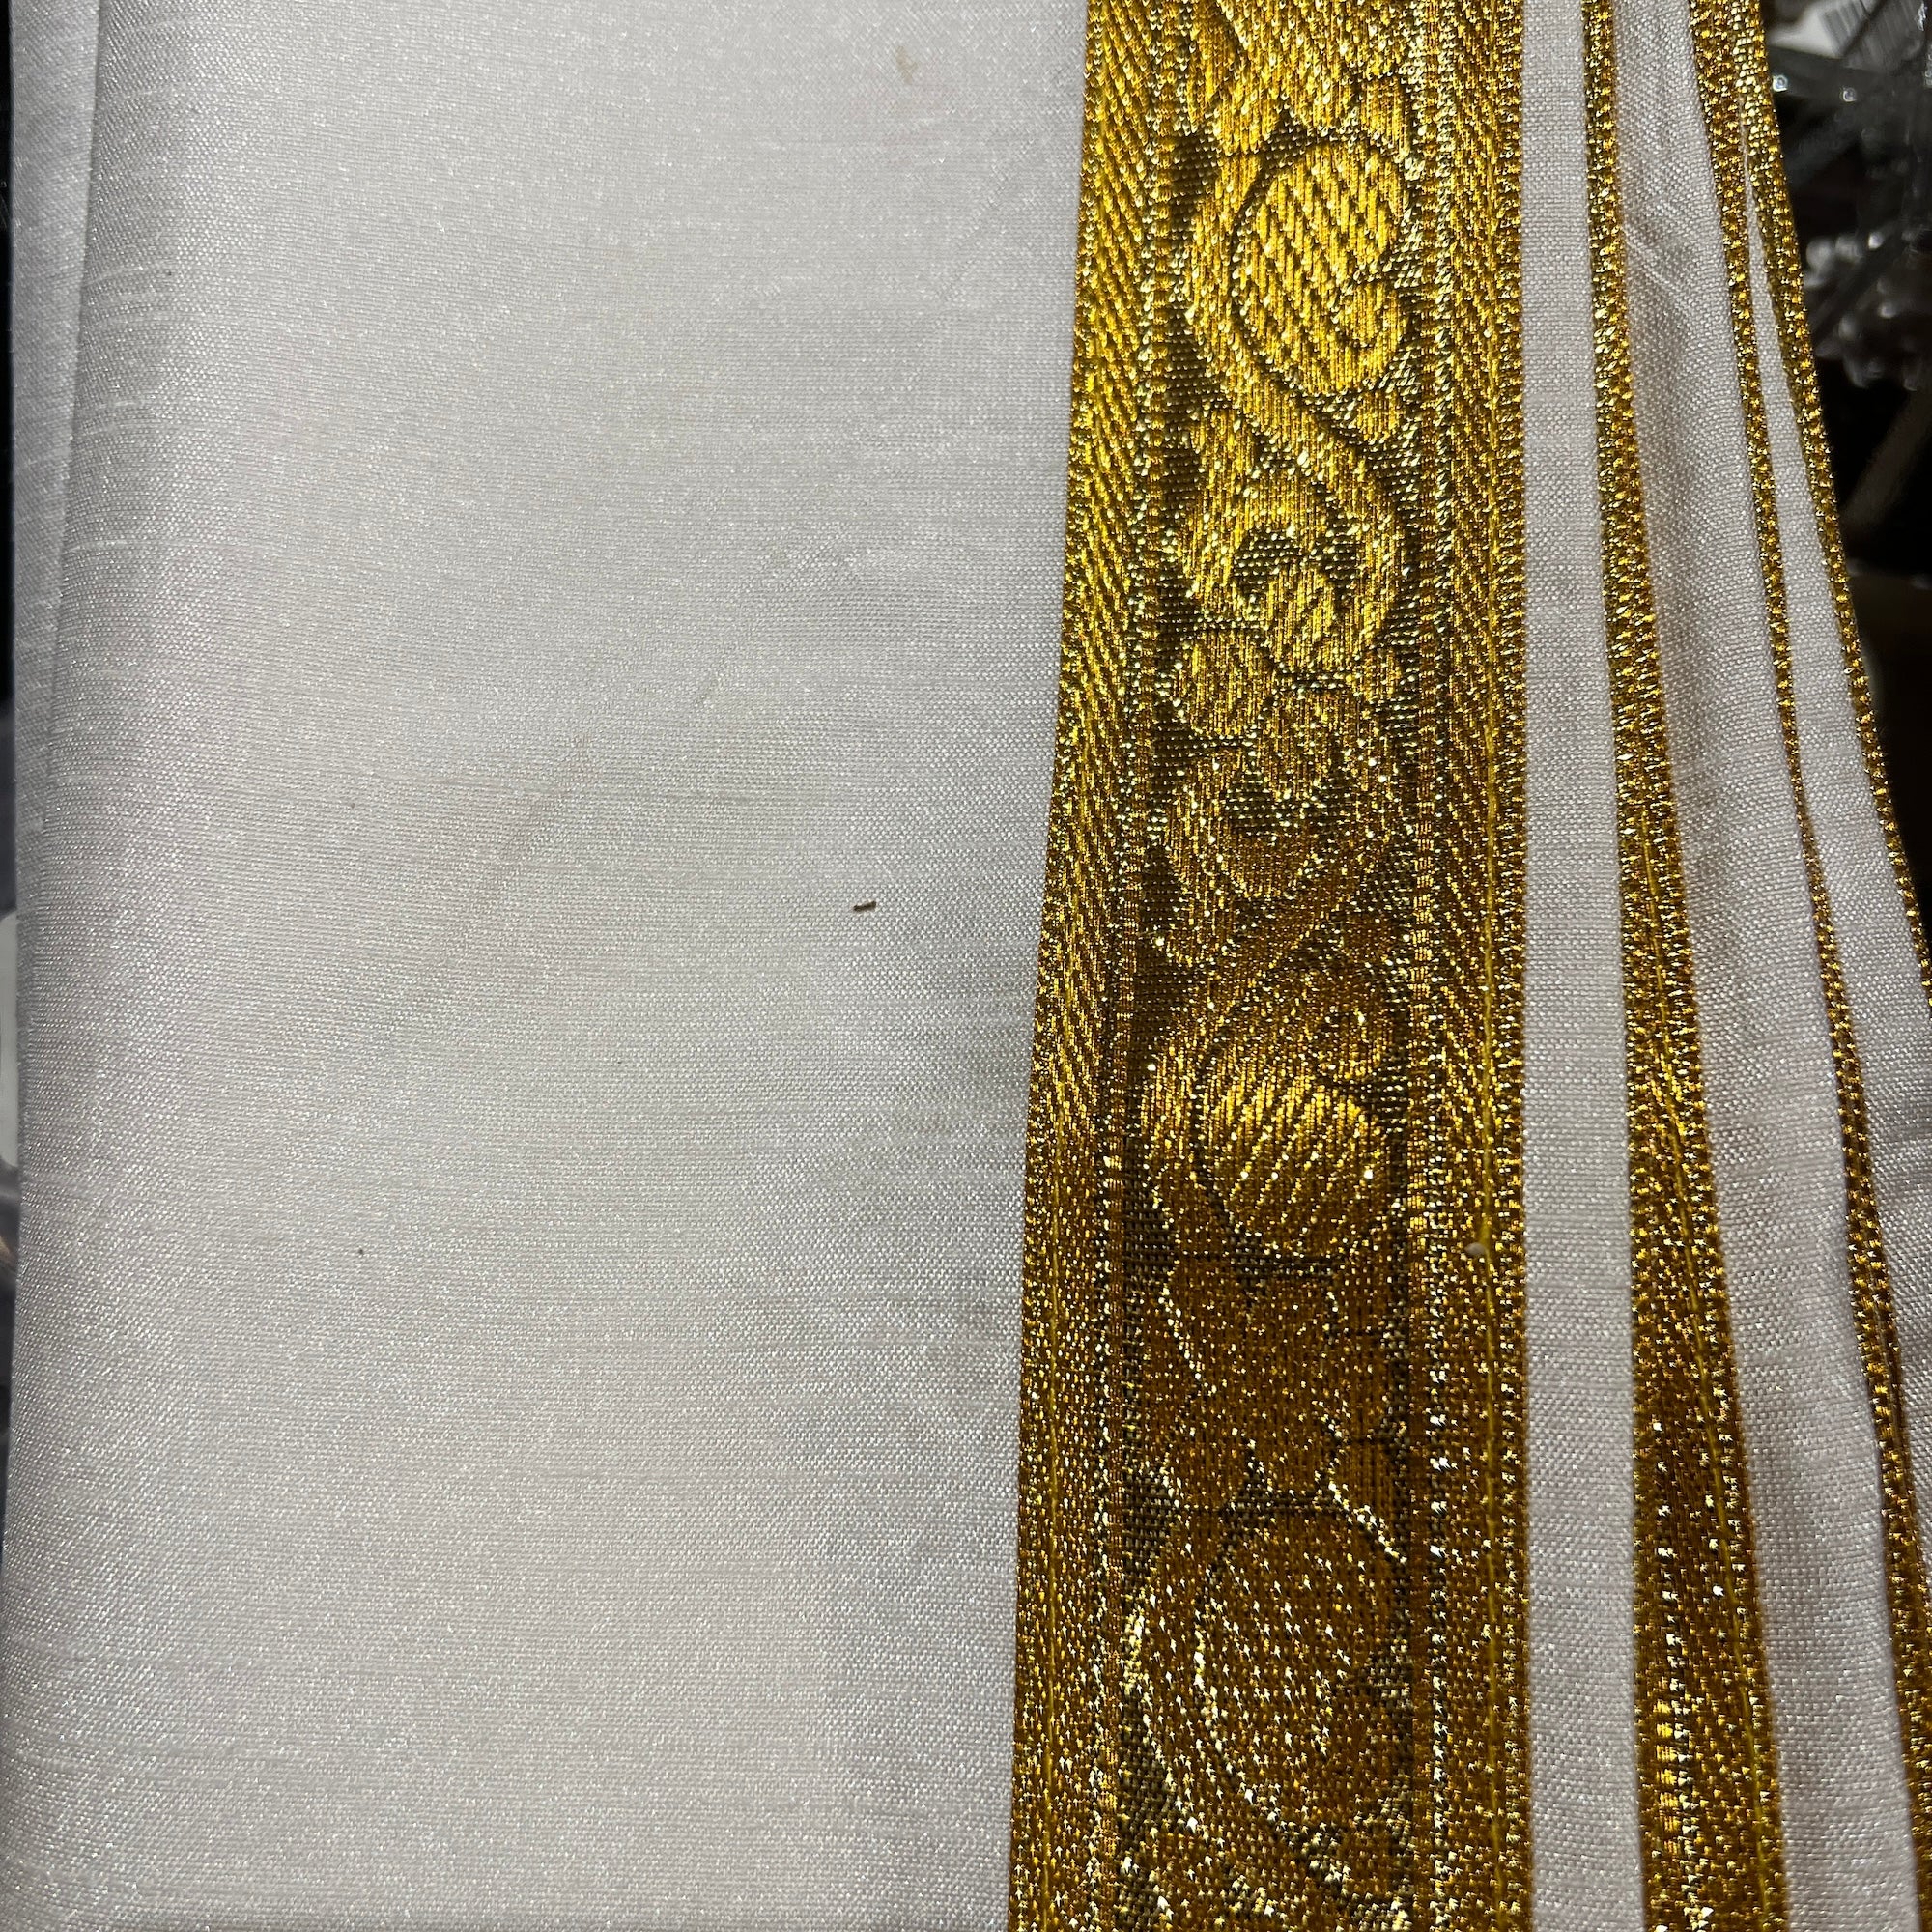 DT Men's Sherwani Stole- Various Colors - Vintage India NYC